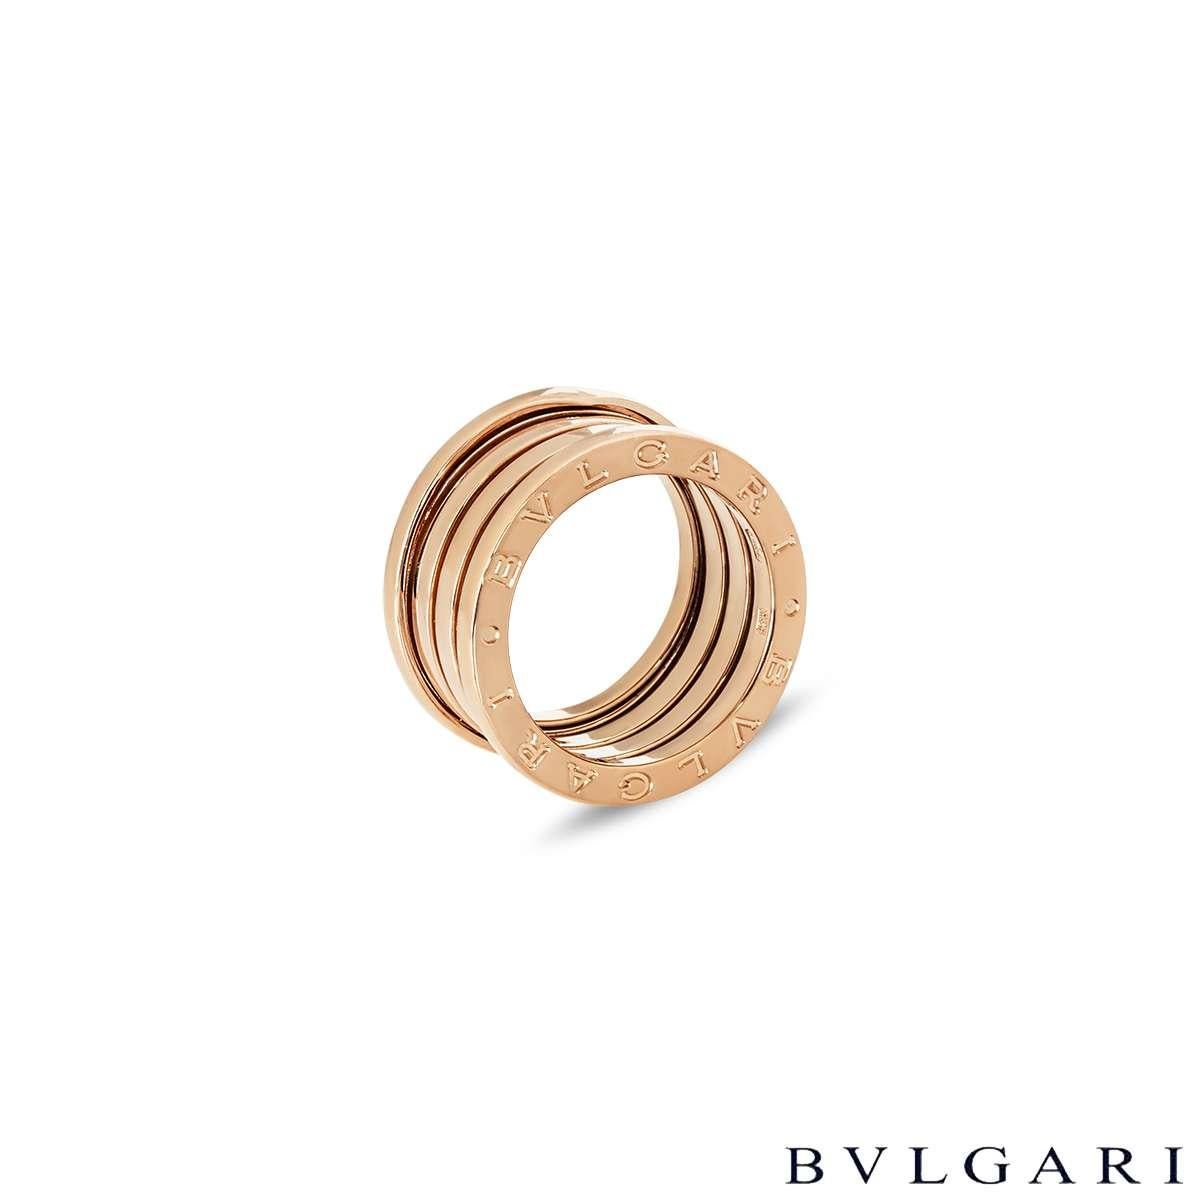 A classic 18k rose gold ring by Bvlgari from the B.Zero1 collection. Comprises of the iconic spiral design bands with the 'Bvlgari Bvlgari' logo engraved around the outer edges. The ring is a size UK M - EU 52 and has a gross weight of 10.4